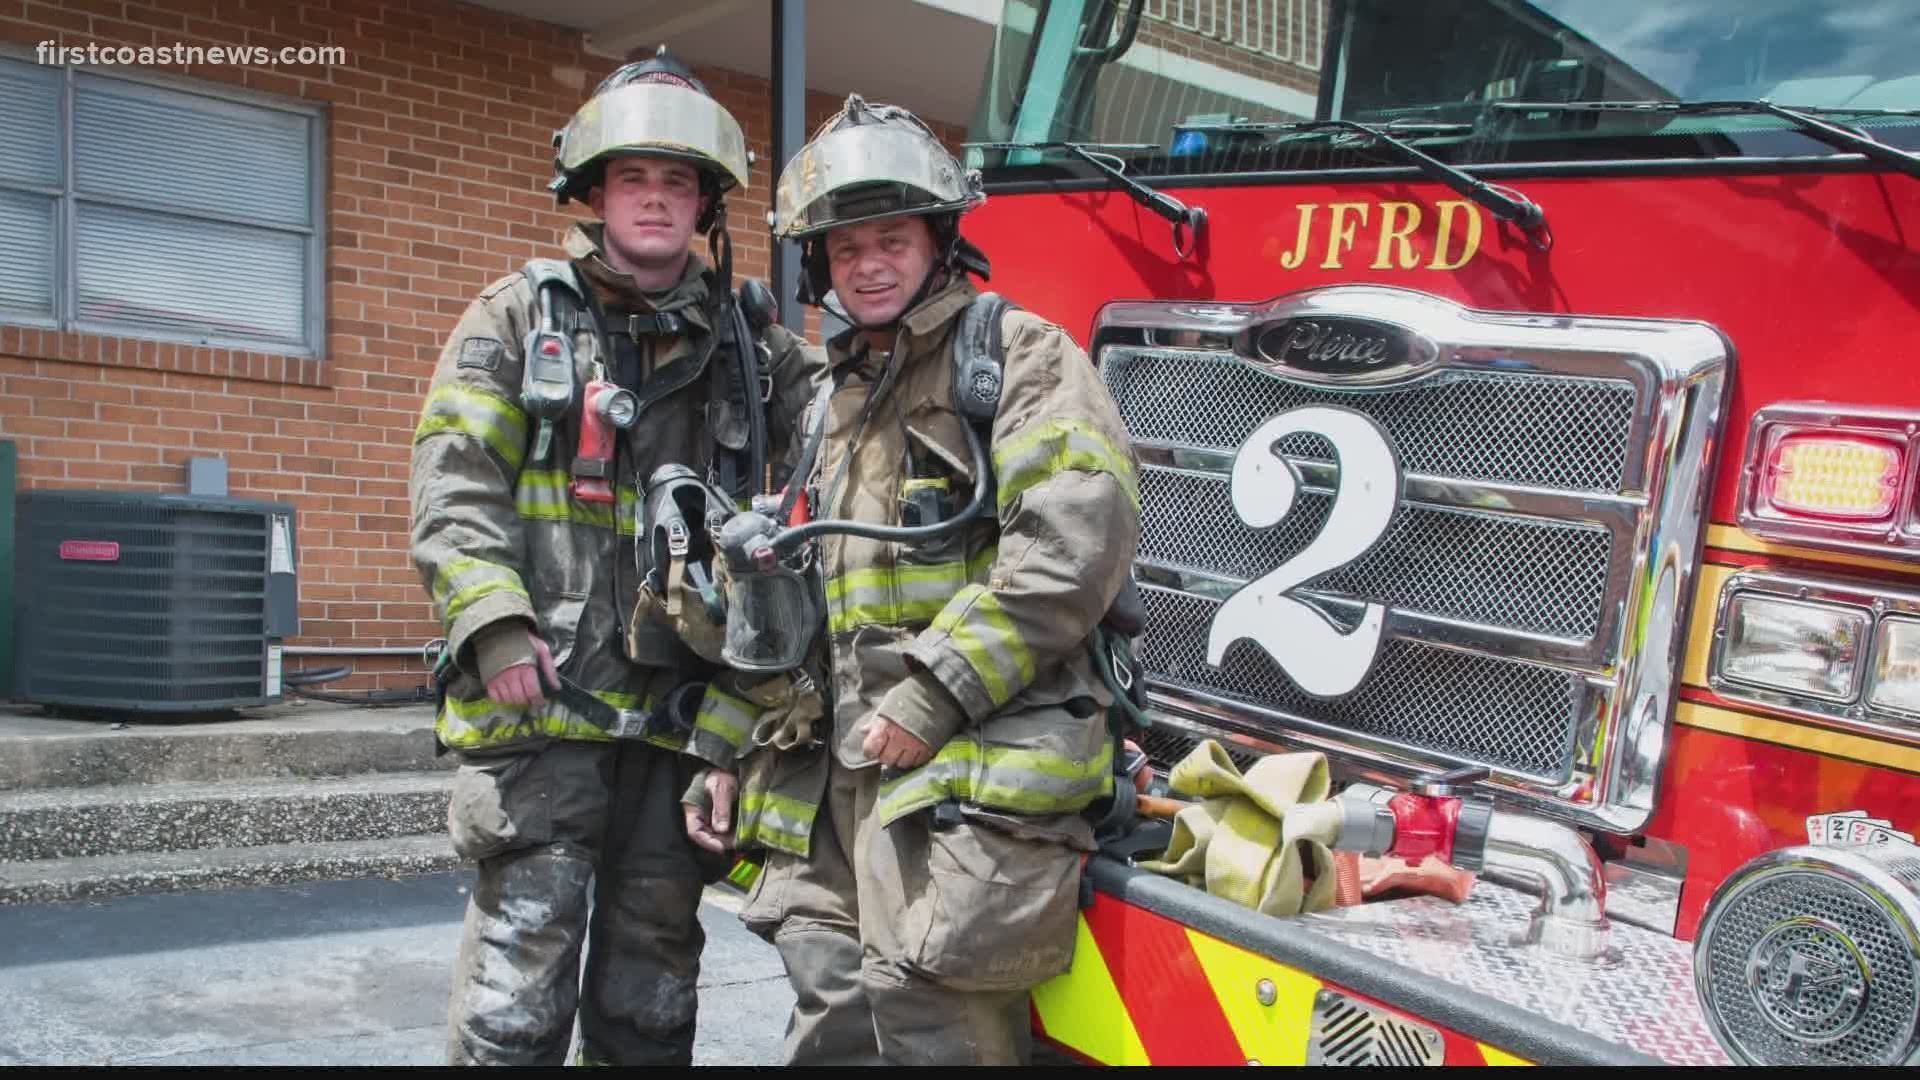 The city is turning to its recent retirees to pad numbers as firefighters self-quarantine due to possible COVID-19 exposure.